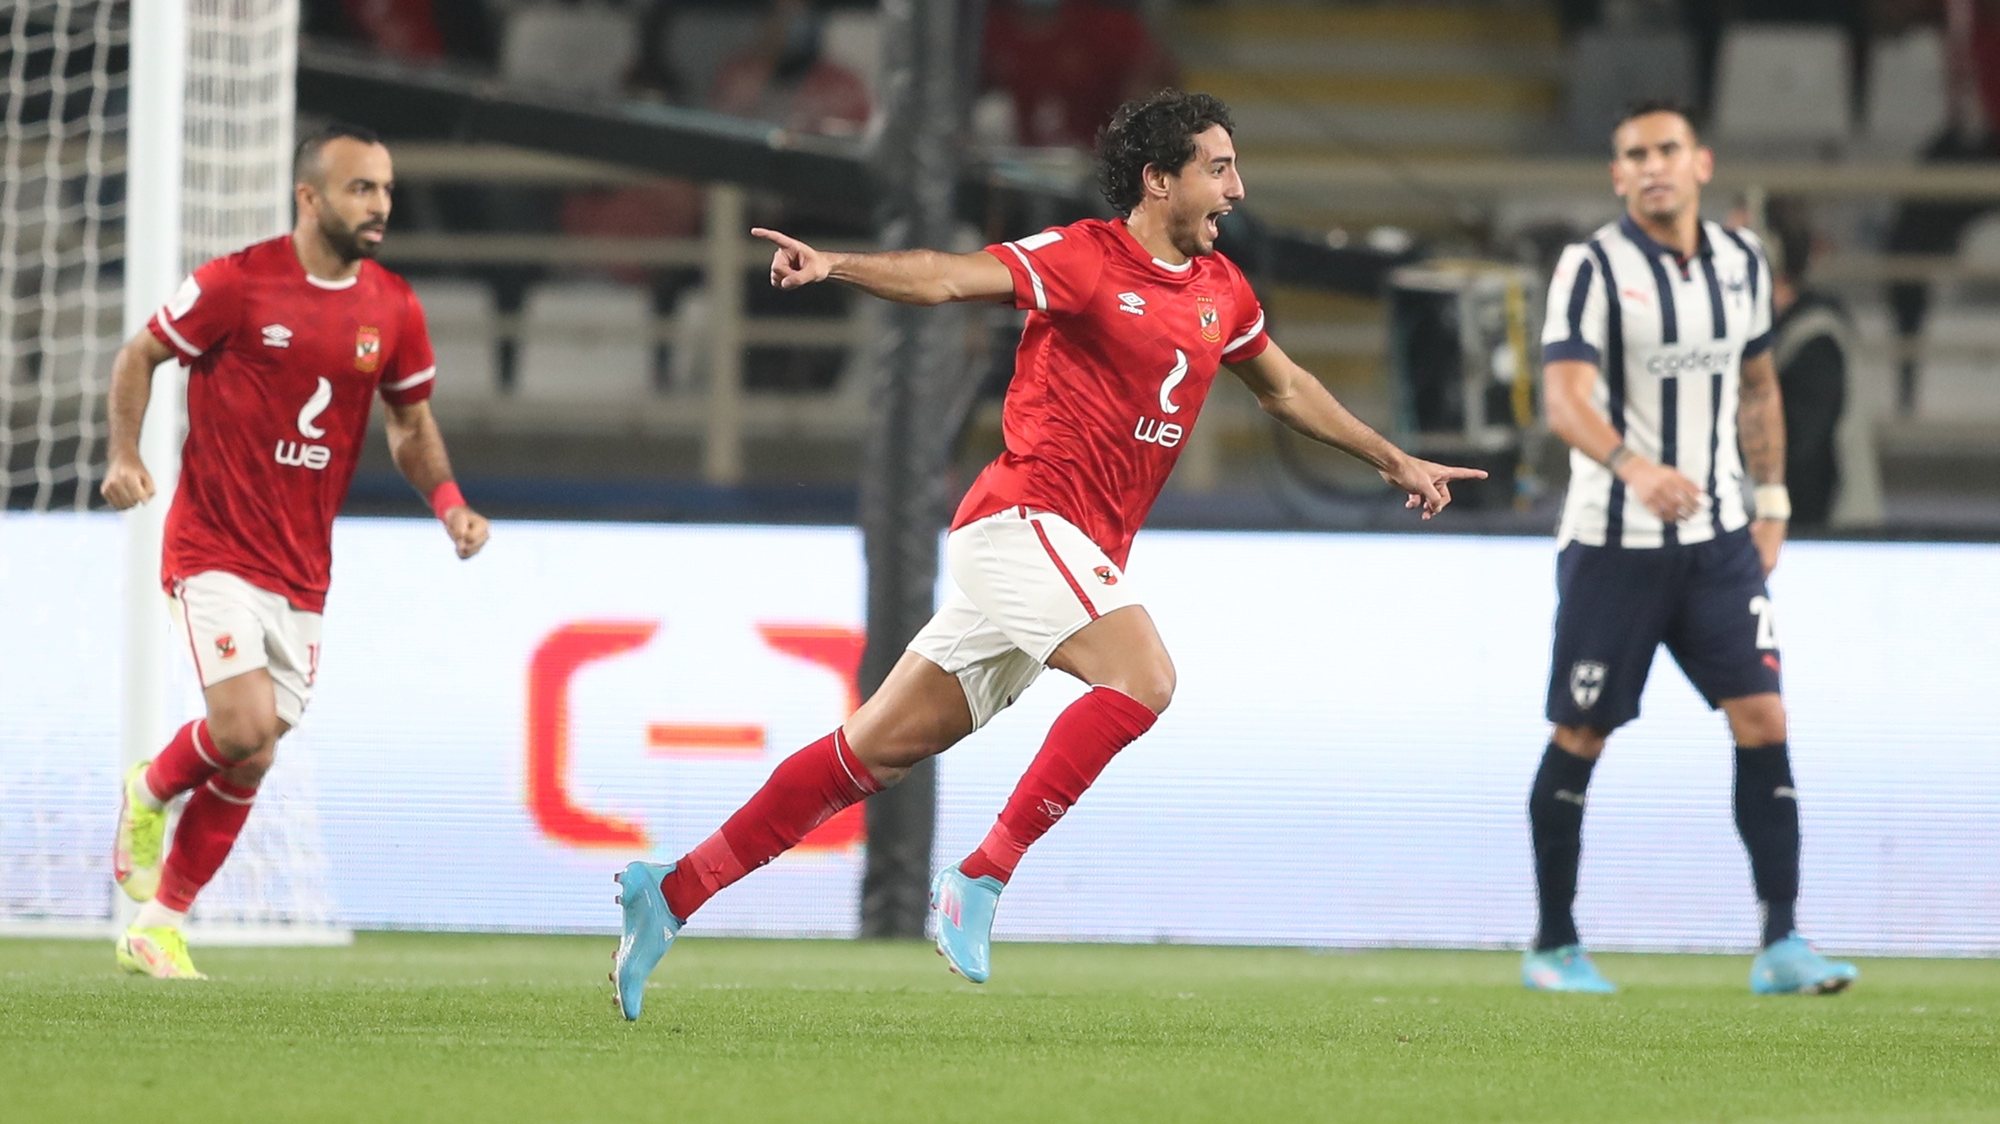 epa09730472 Mohamed Hany (C) of Al Ahly SC celebrates after scoring a goal during the FIFA Club World Cup 2021 second round soccer match between Al Ahly SC and CF Monterrey in Abu Dhabi, United Arab Emirates, 05 February 2022.  EPA/ALI HAIDER